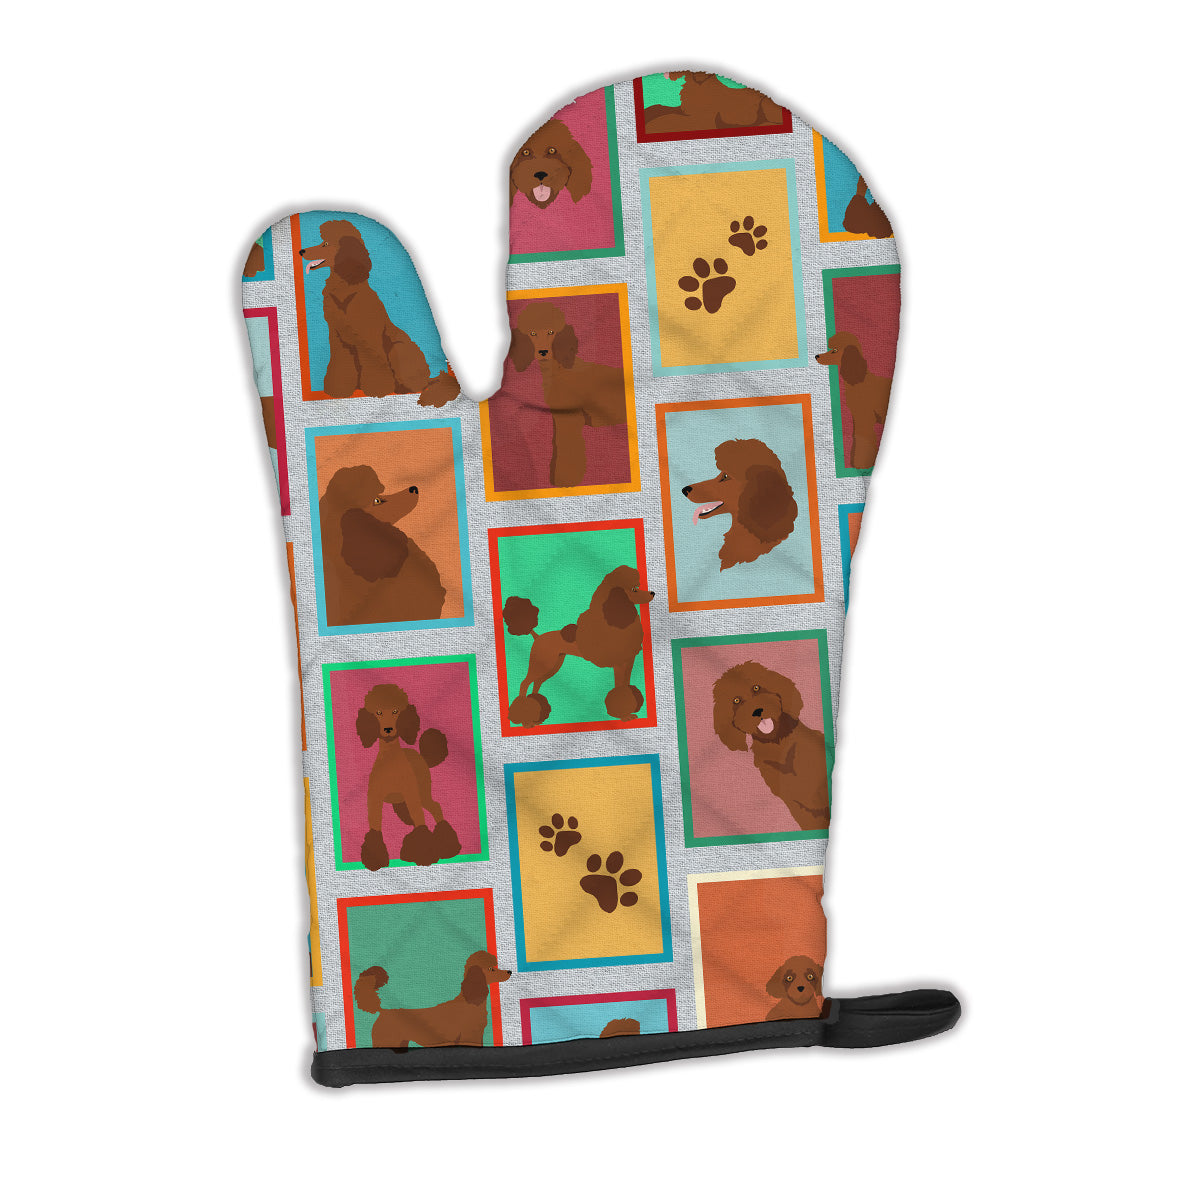 Lots of Chocolate Standard Poodle Oven Mitt